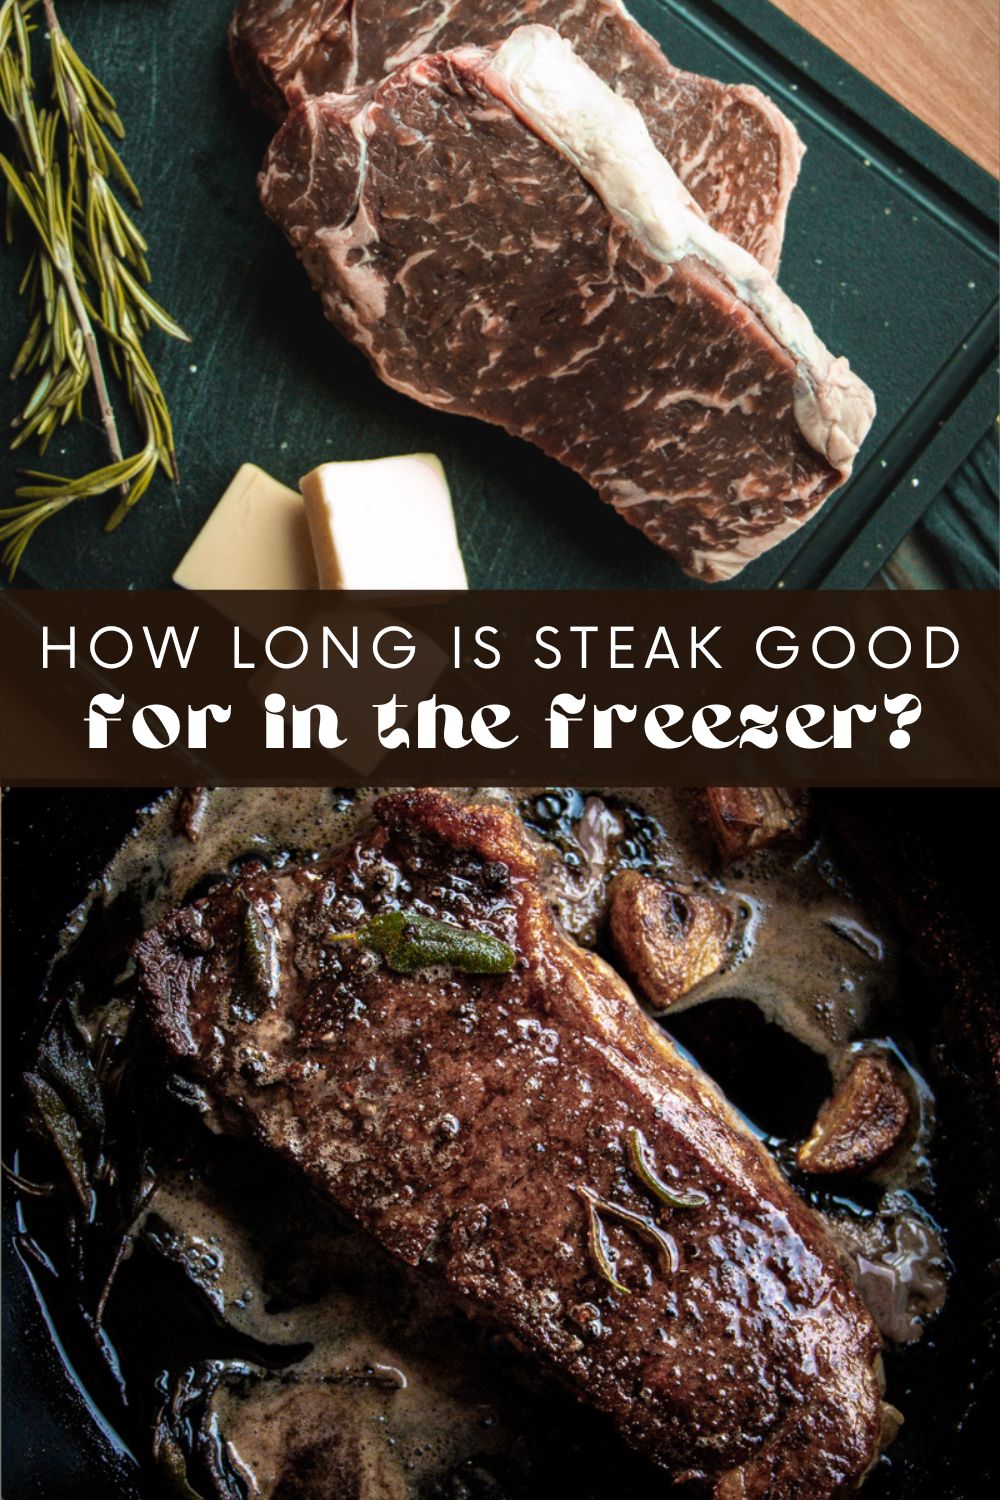 Steak is a much-loved dish that can be served in many excellent ways. Its rich flavor, texture, and juicy tenderness make it a favorite for any occasion. But if you have leftovers or want to stock up on steak to save time and money, how long does steak last in the freezer?